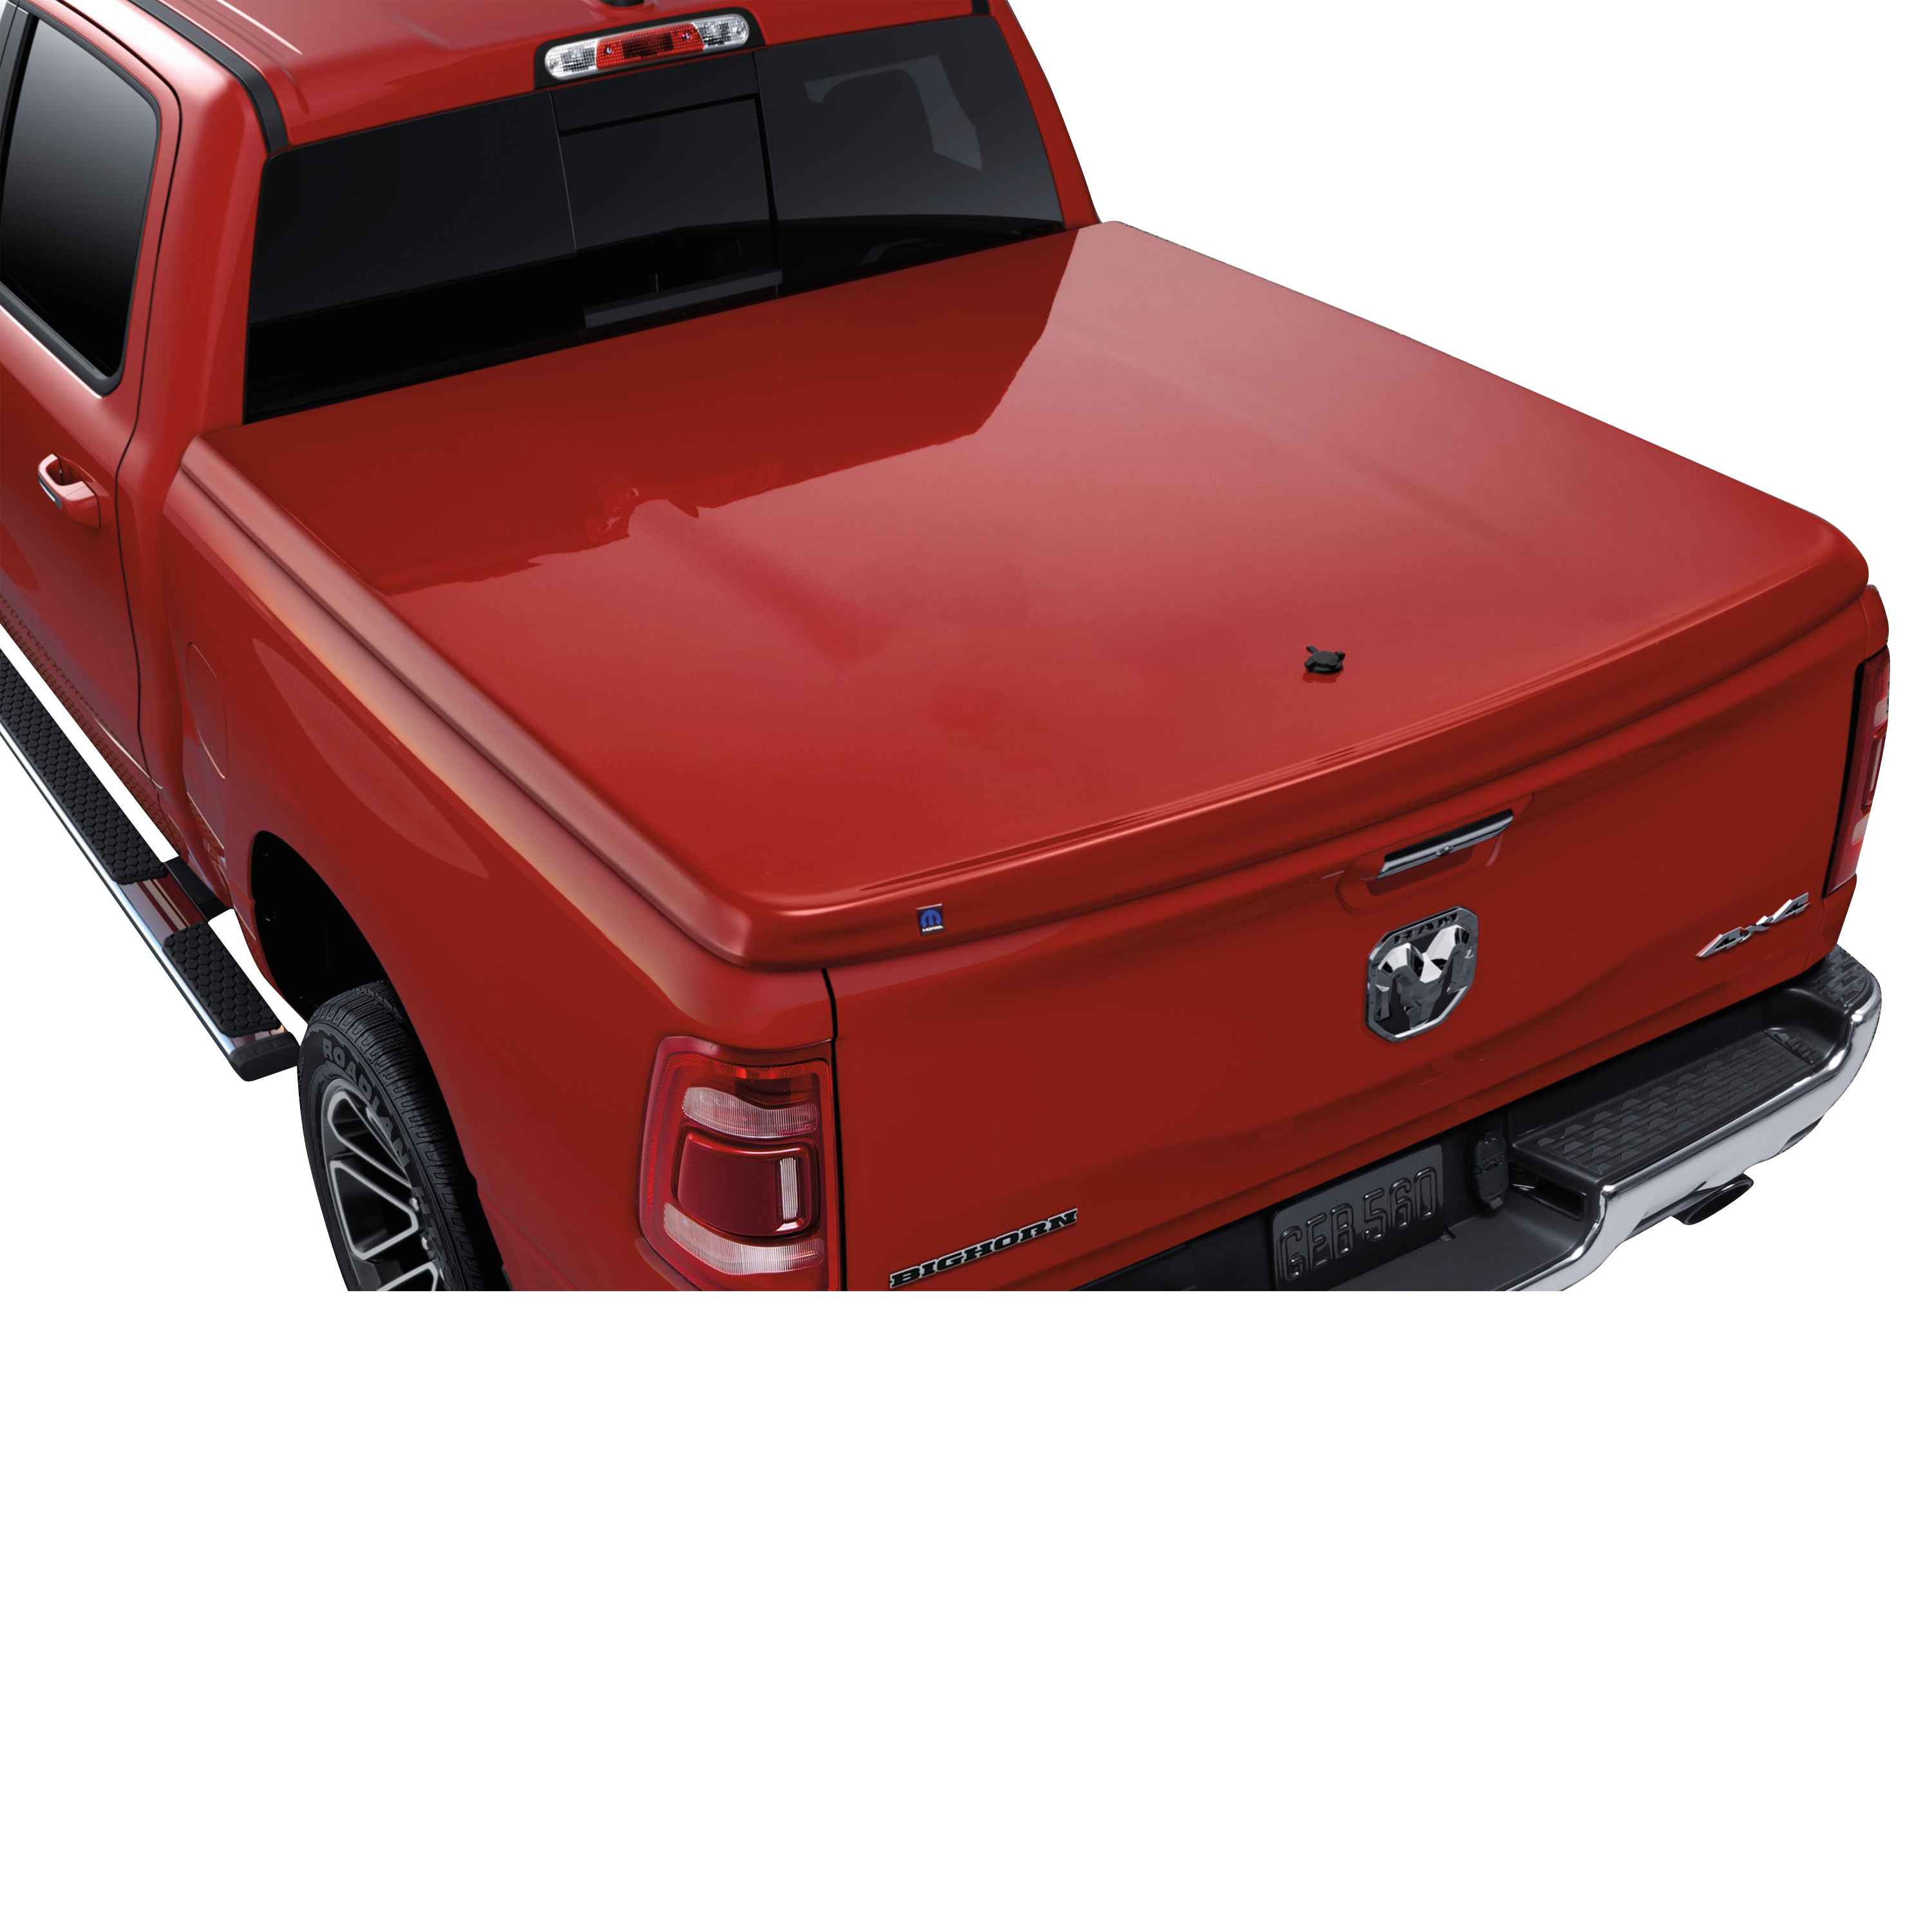 OEM 2020 Ram 1500 One-Piece Tonneau Cover in Body Color for 6 4 Conventional Bed - Delmonico Red (Part #82215241AB)